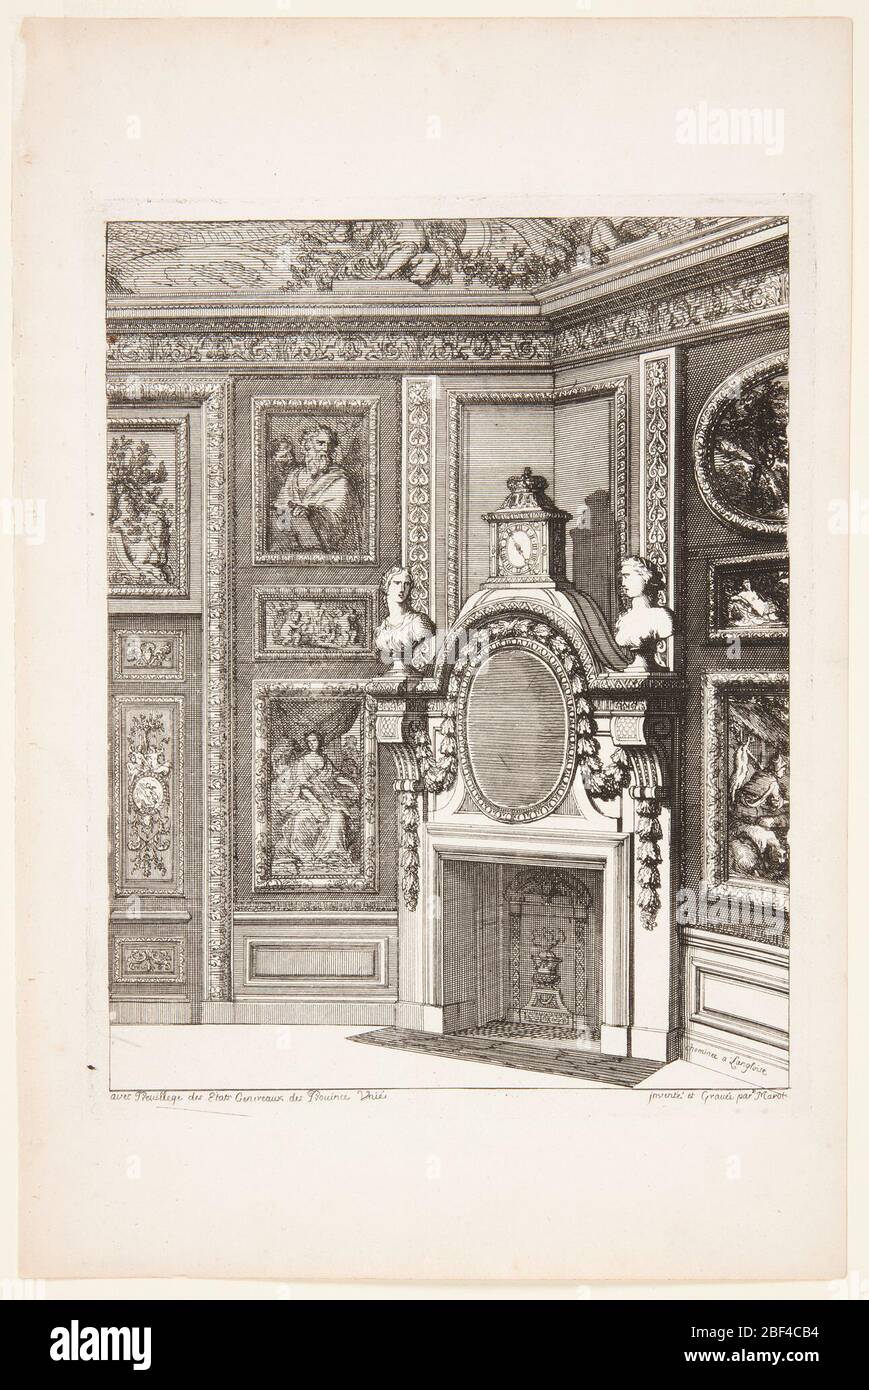 Corner Chimneypiece published in Nouvelles Chiminees Faitte en Plusier en Droits de la Hollande et Autres Provinces du Dessin de D Marot. Design for a mantlepiece in the corner of a room. The mantlepiece is ornate with a large cartouche and busts on either side. Along the walls are framed paintings. Stock Photo